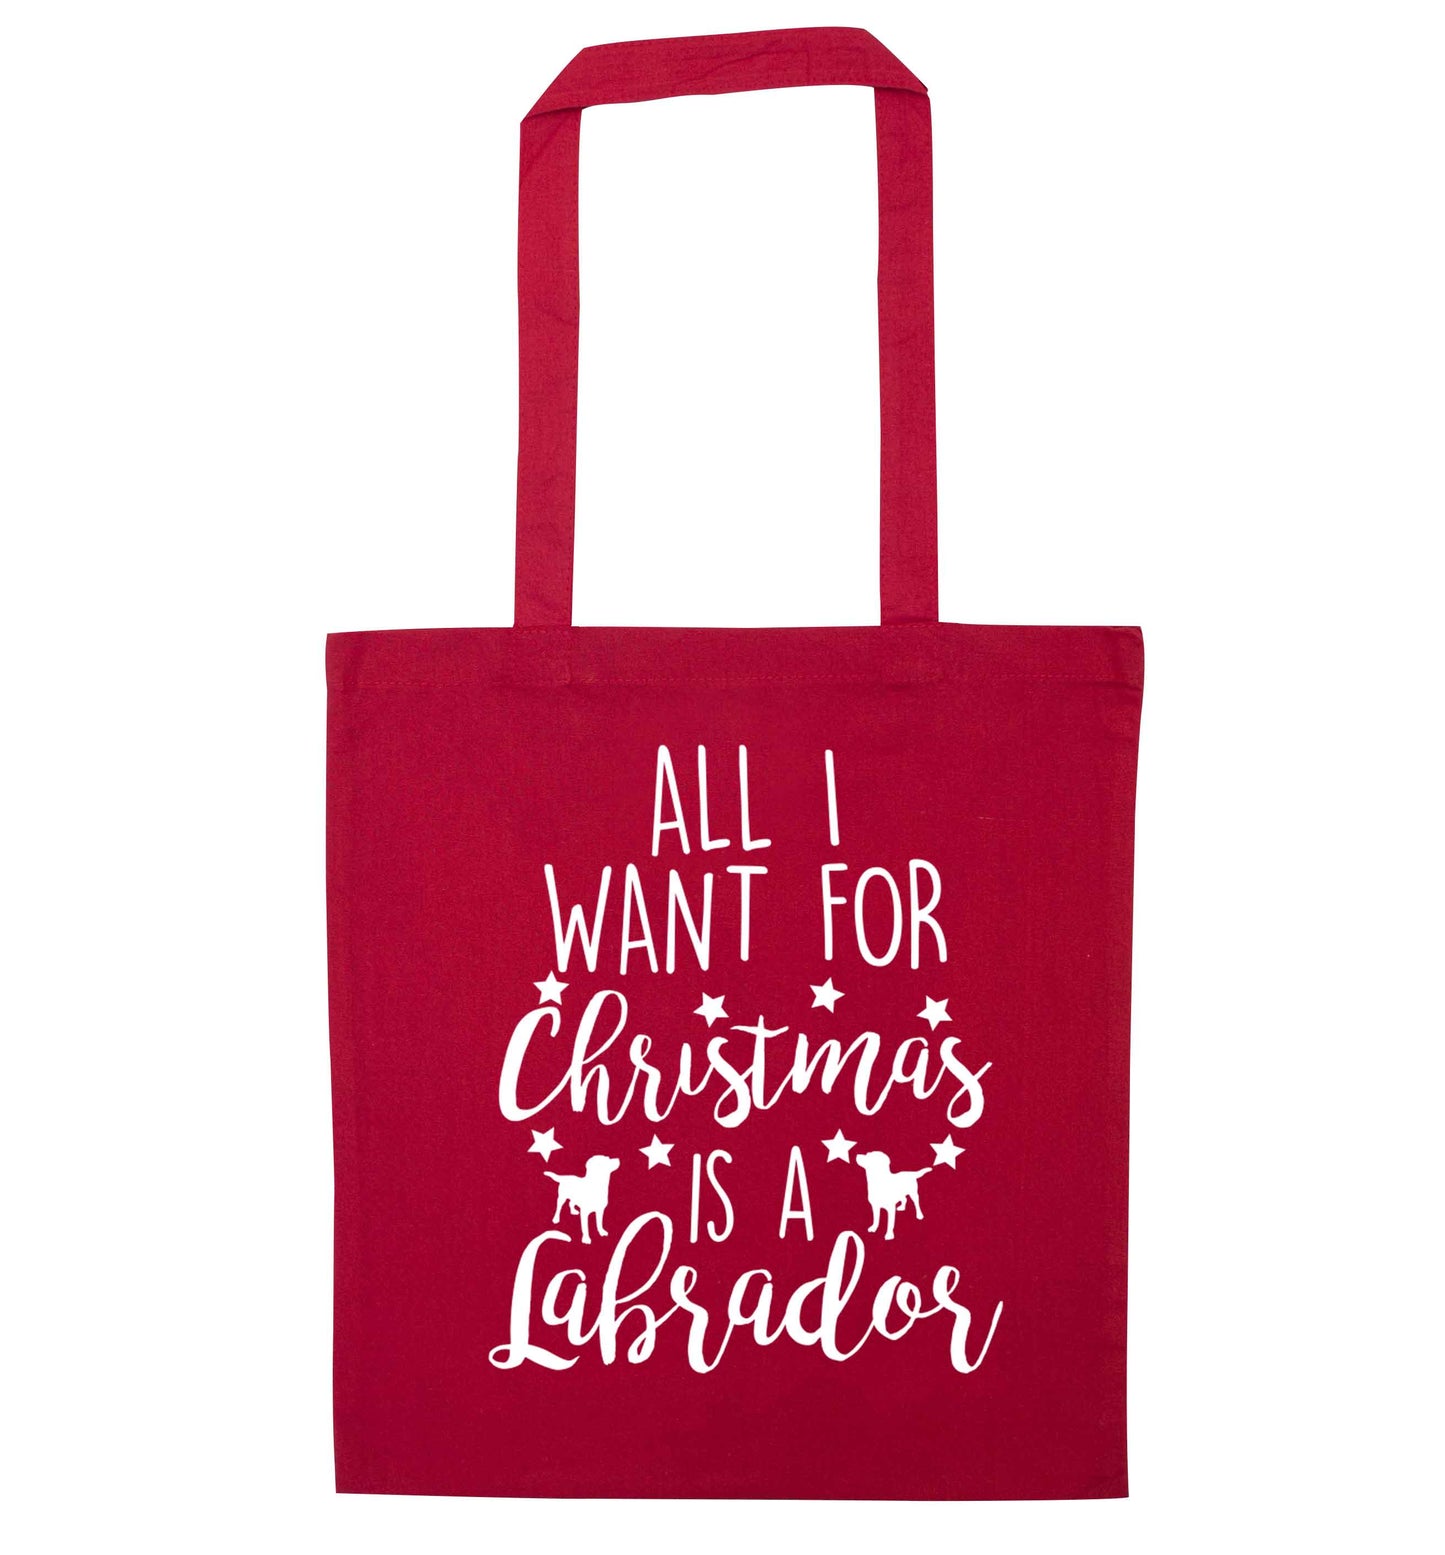 All I want for Christmas is a labrador red tote bag